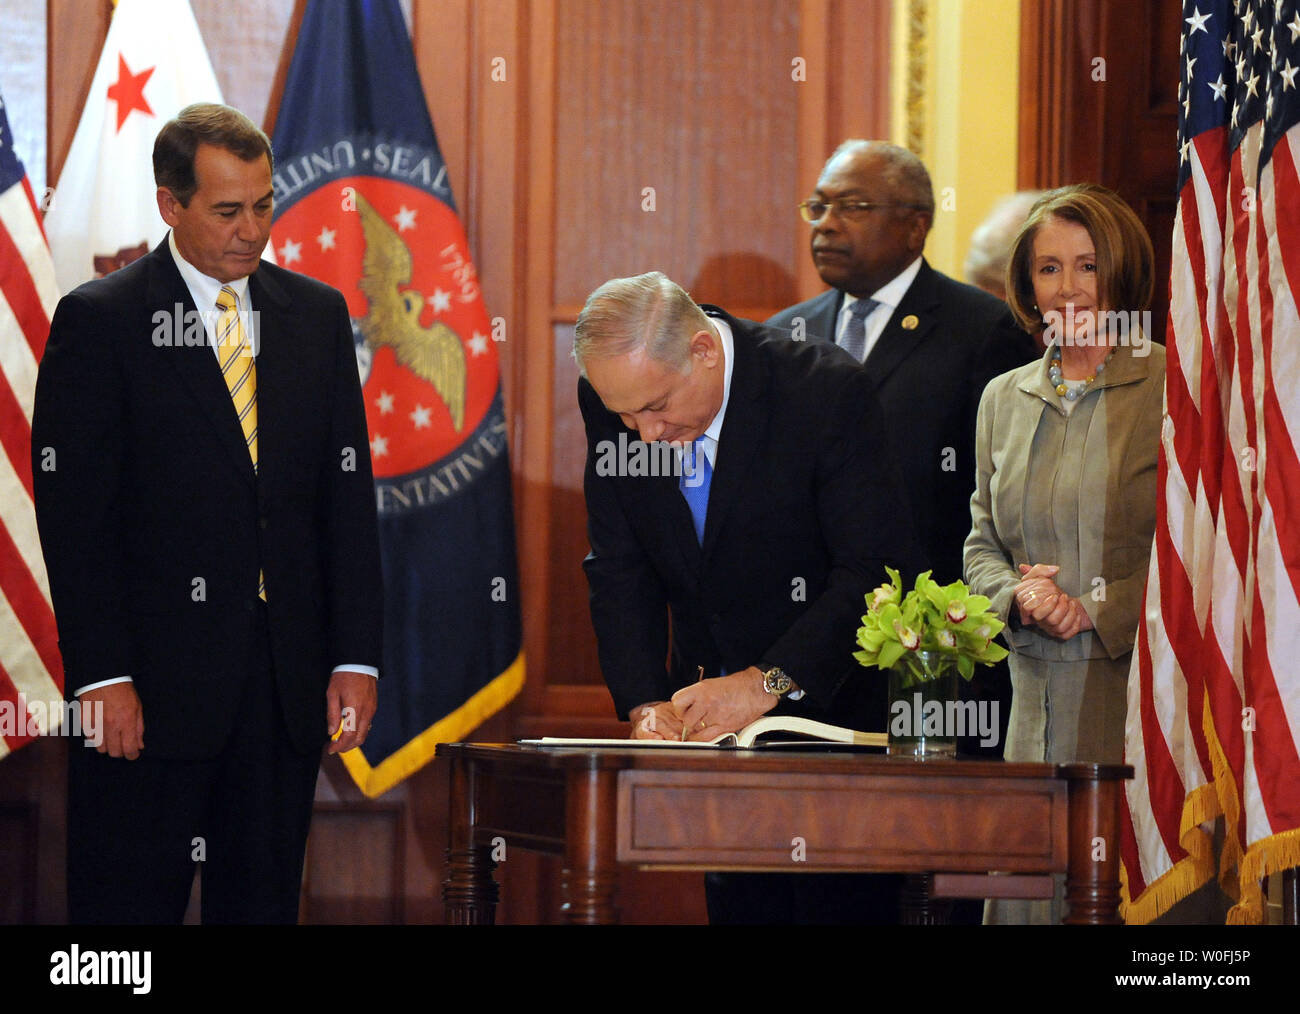 Israeli Prime Minister Benjamin Netanyahu signs a guest book as House Minority Leader John Boehner, R-OH, House Majority Whip James Clyburn, D-SC, and Speaker of the House Nancy Pelosi, D-CA, (L to R) look on before a photo opportunity near the Speaker's Balcony of the U.S. Capitol in Washington on March 23, 2010.     UPI/Roger L. Wollenberg Stock Photo